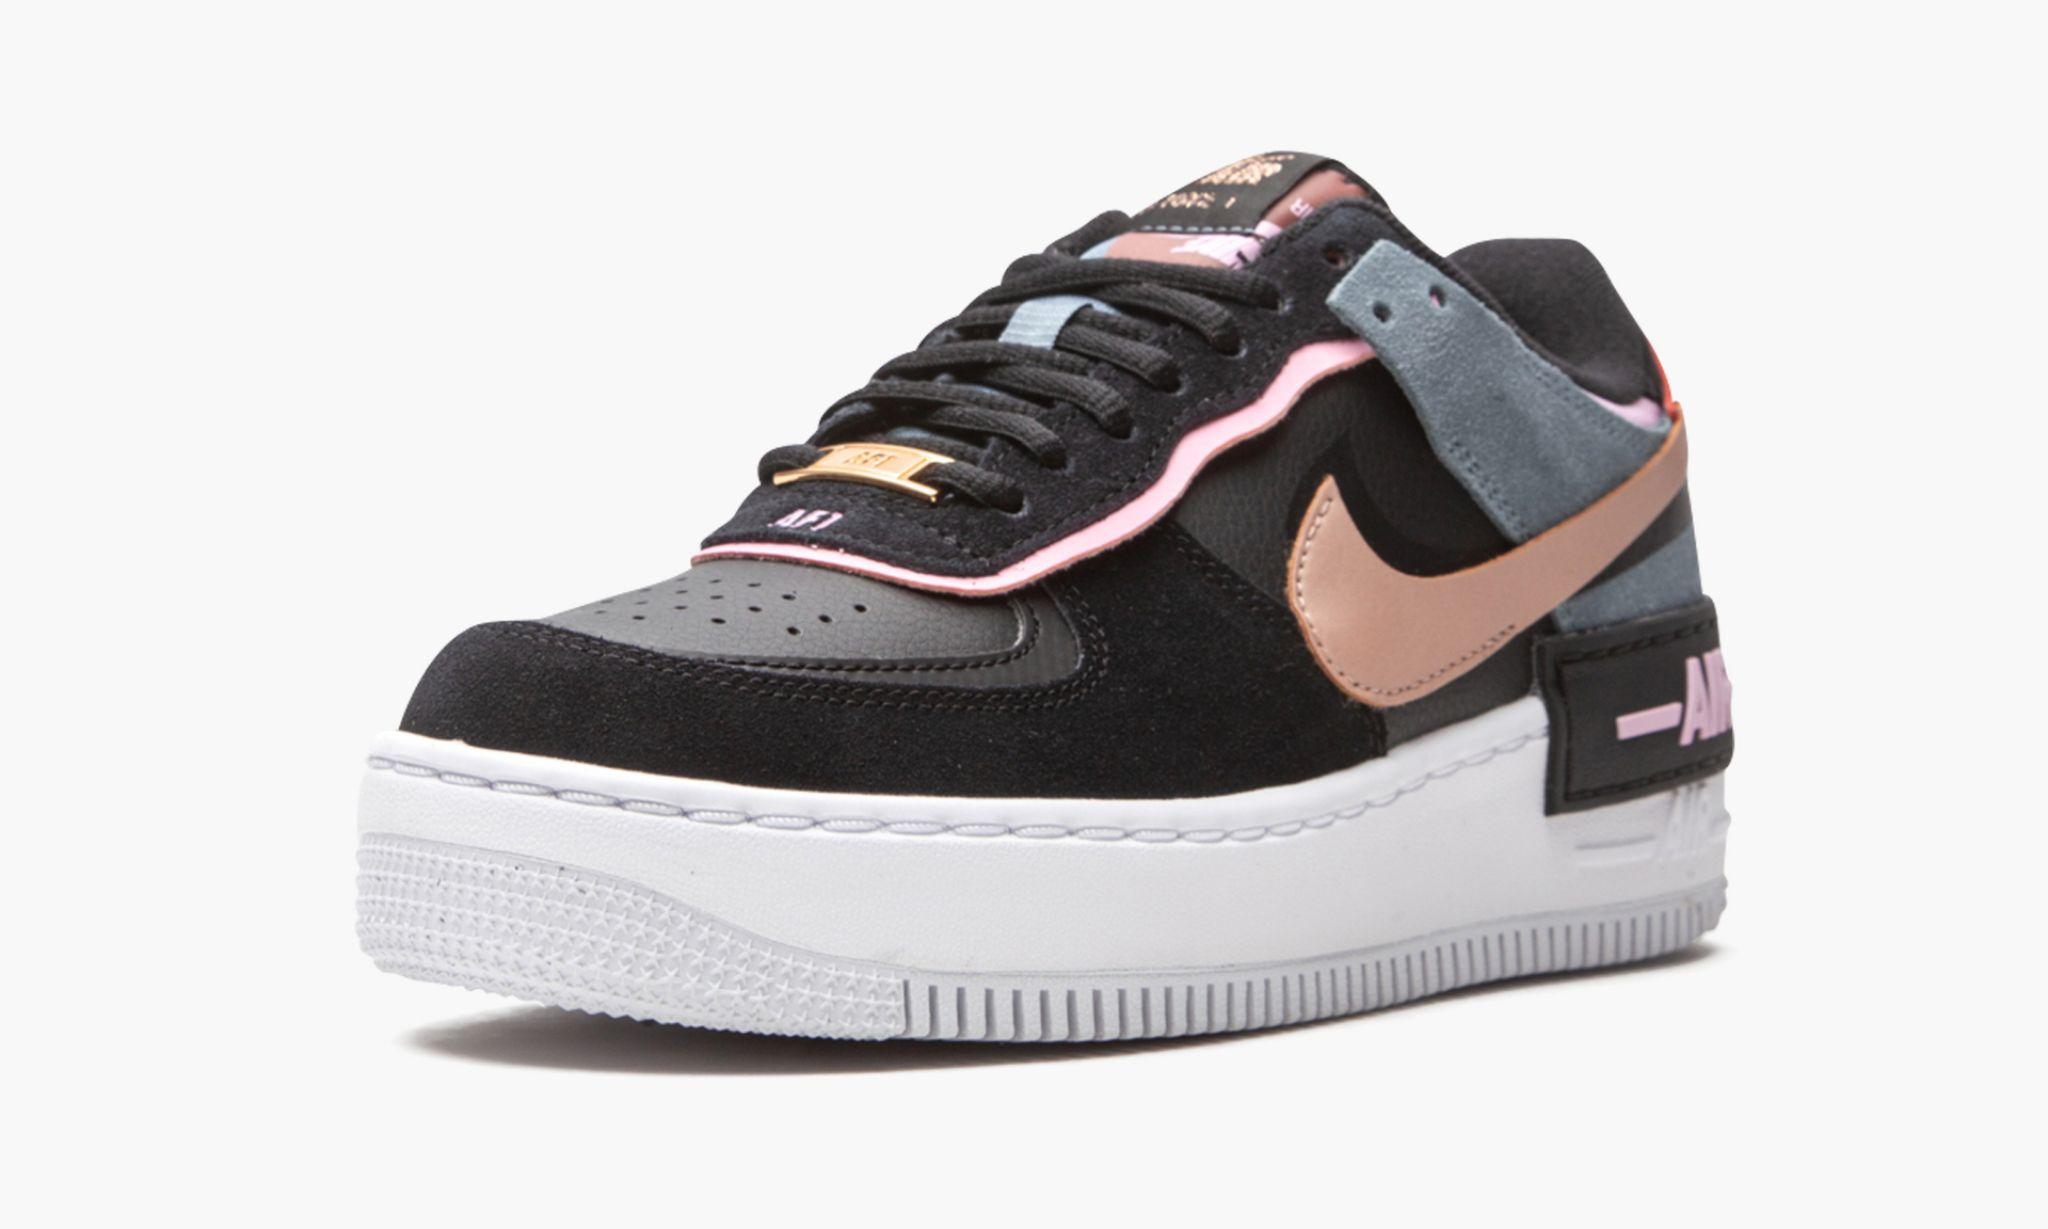 Nike Rubber Air Force 1 Shadow "black / Light Arctic Pink" Shoes | Lyst